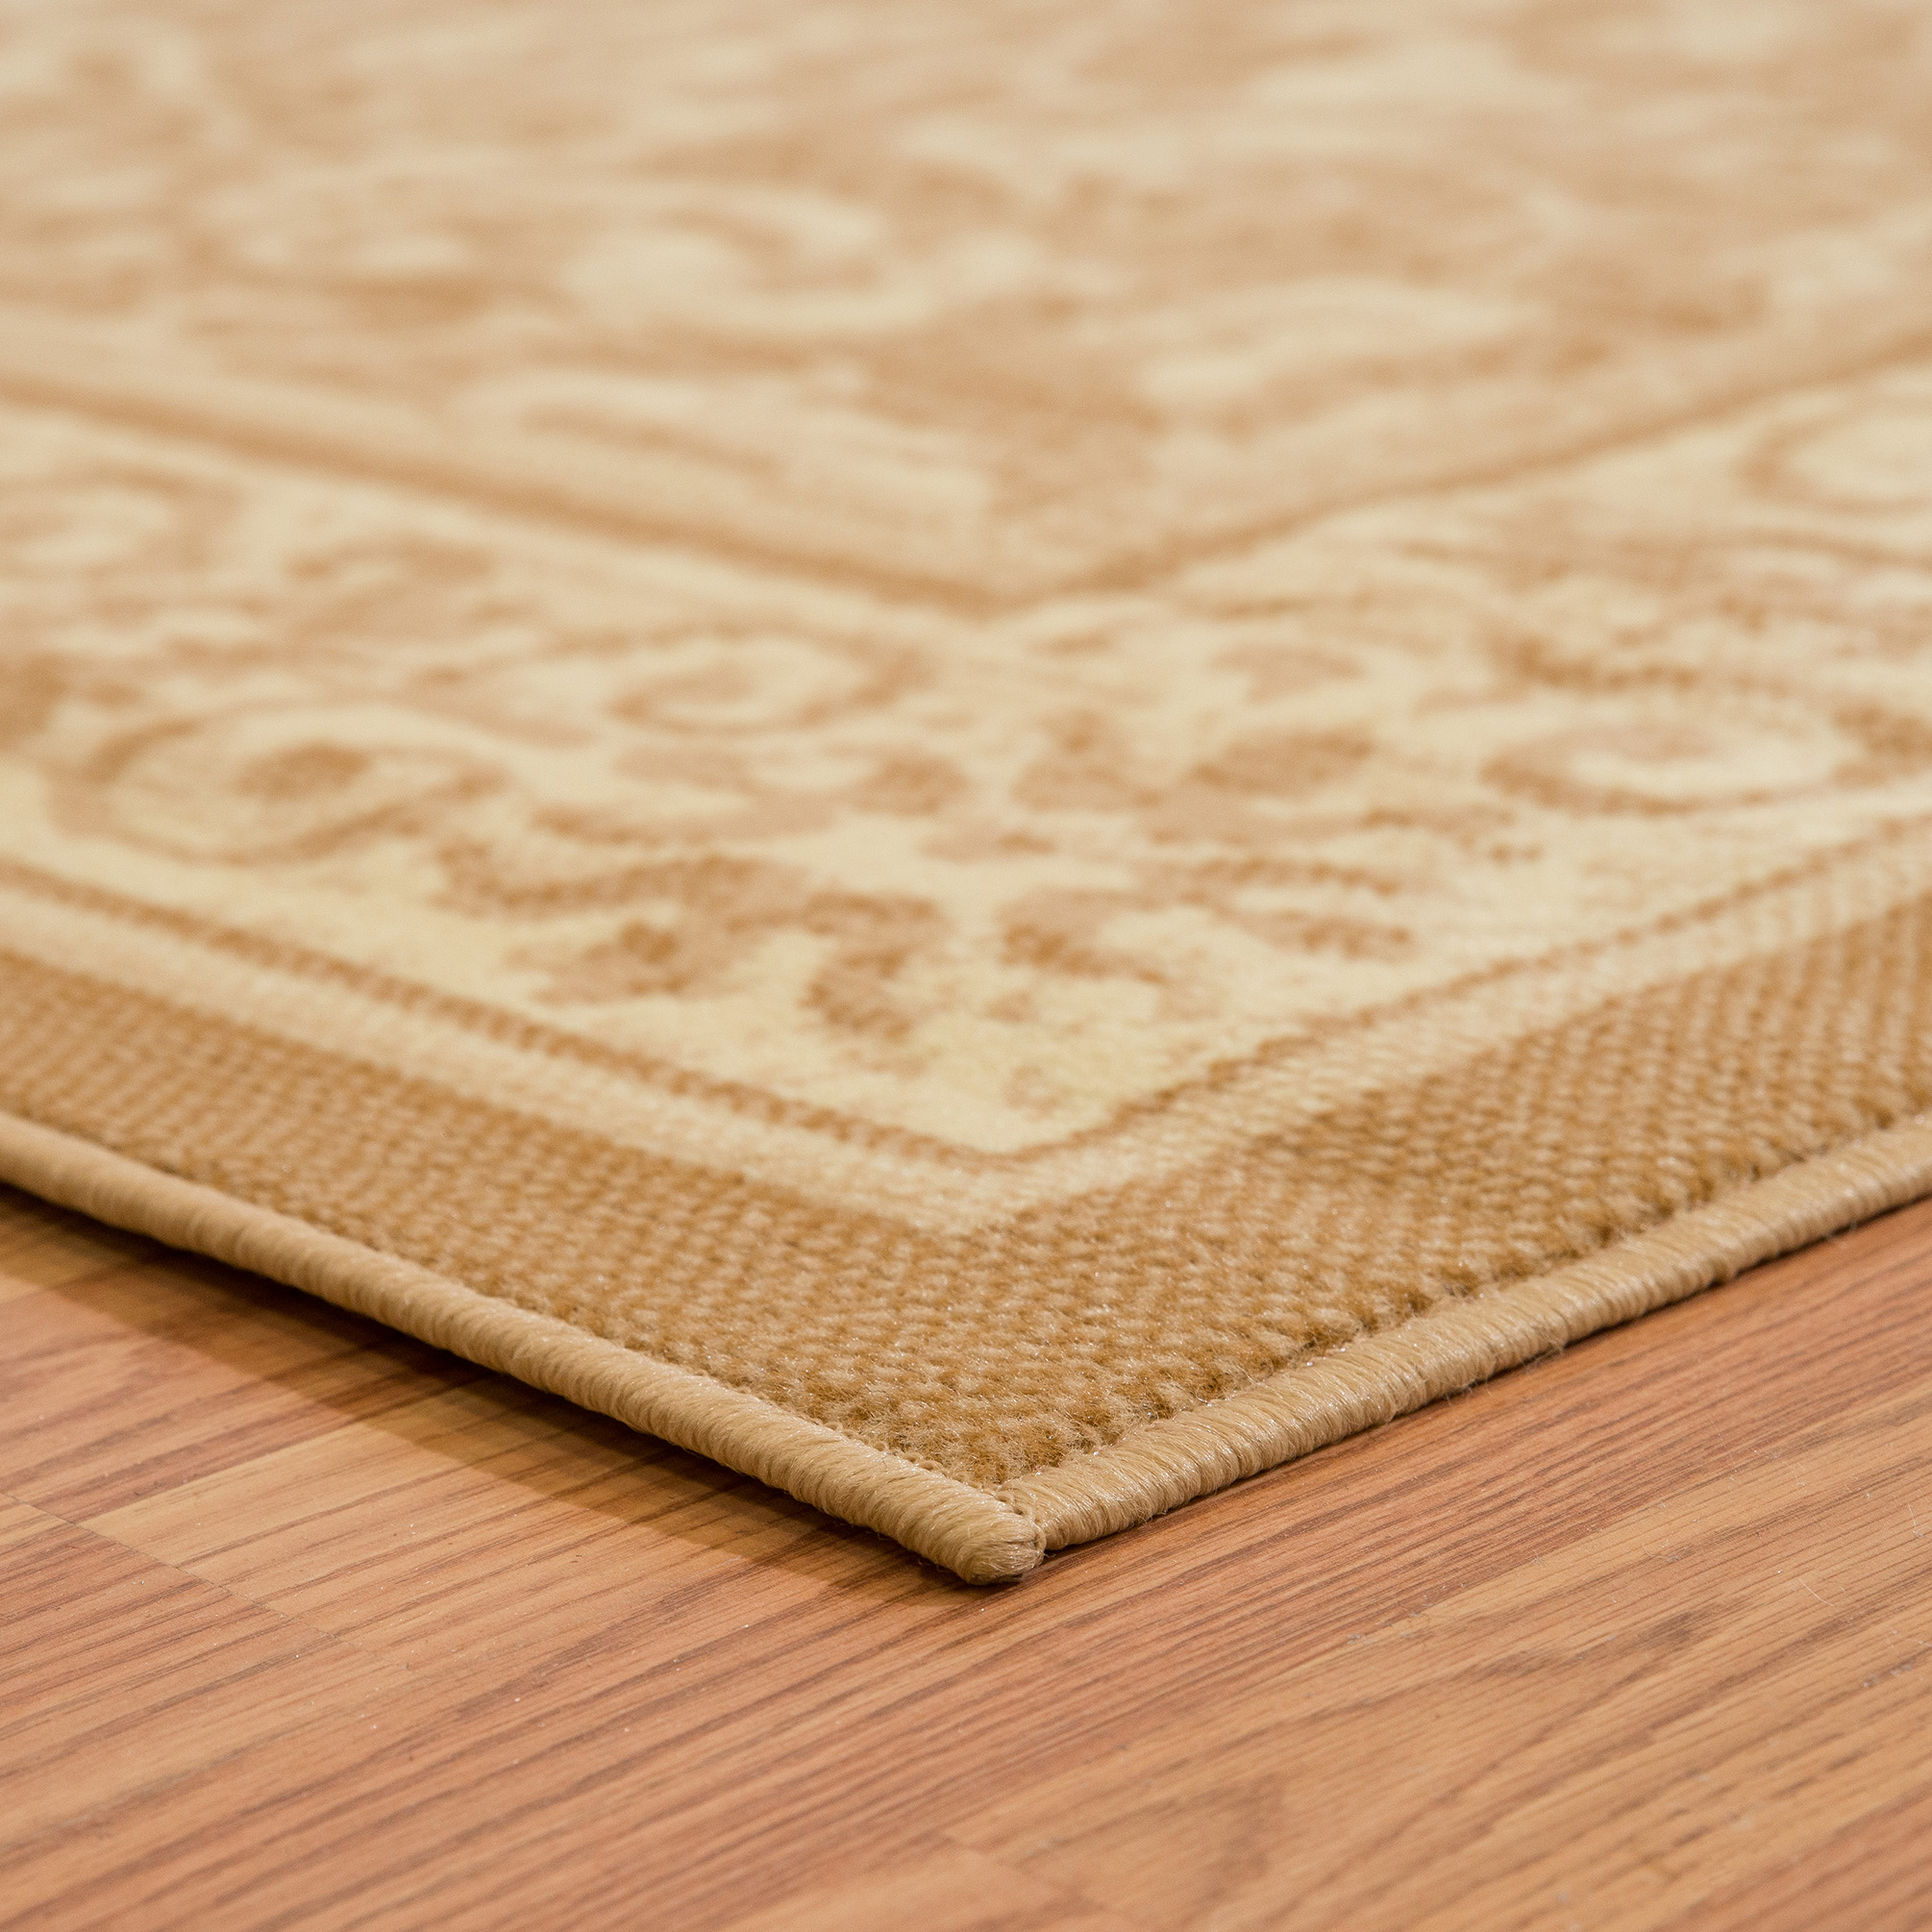 United Weavers Plaza Genevieve Accent Rug, Bordered Pattern, Beige, 1'11" X 3'3" - image 5 of 6